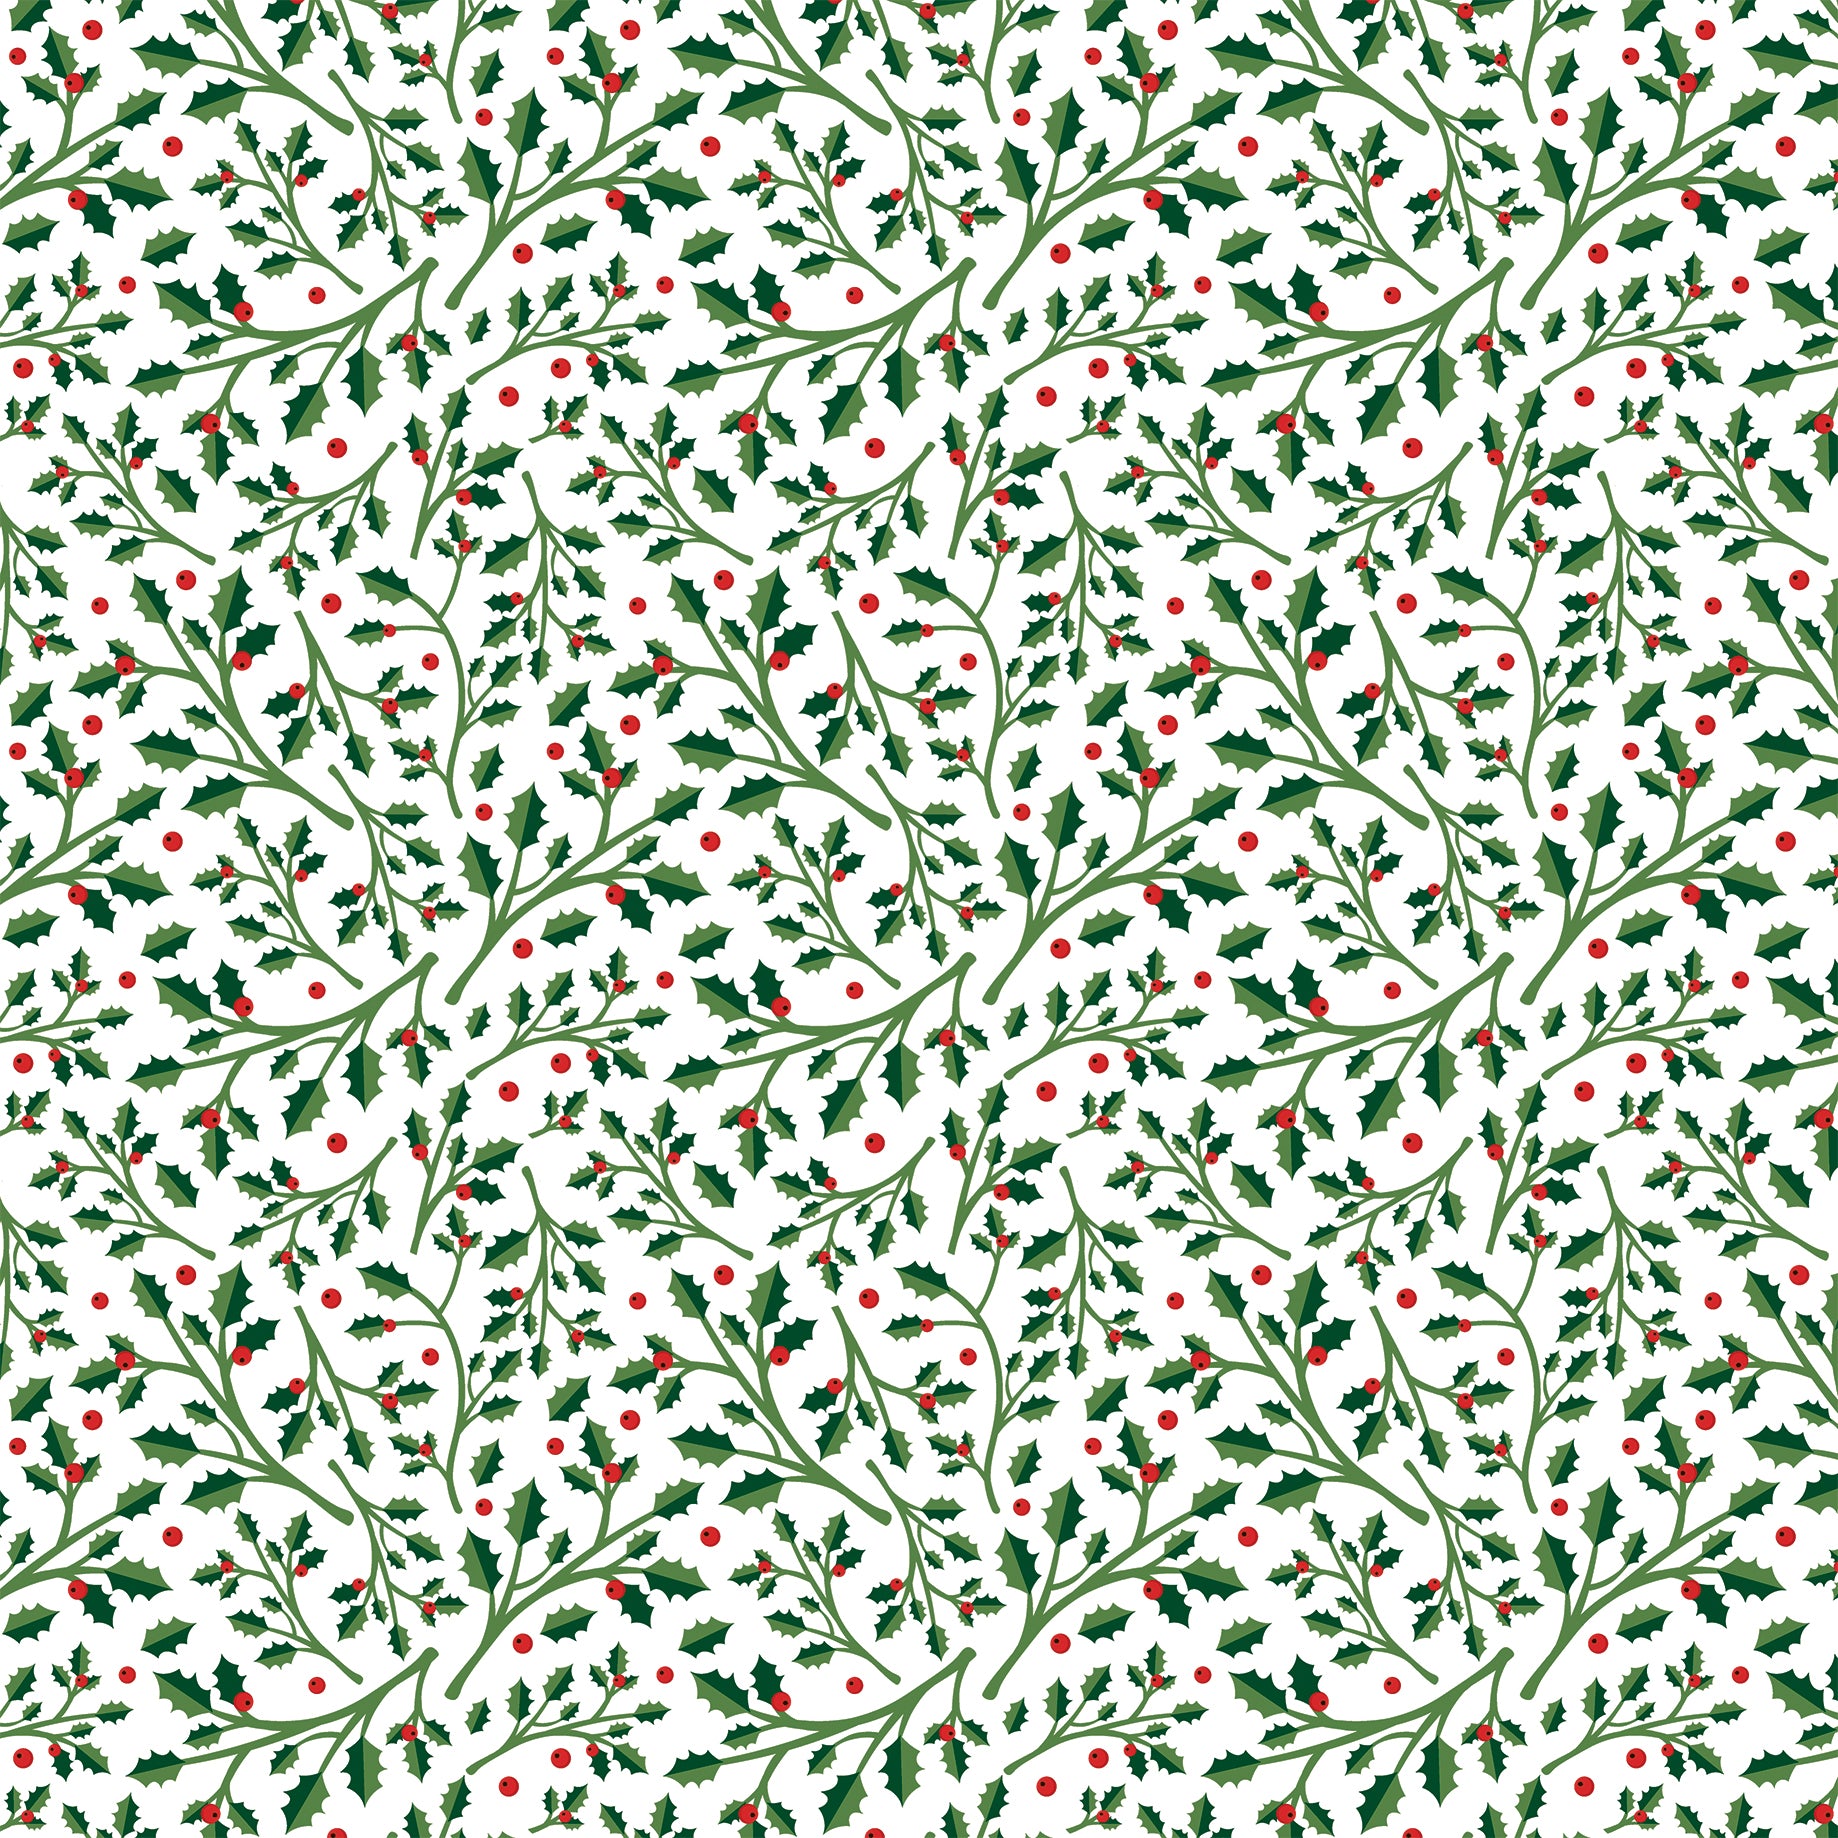 Have A Holly Jolly Christmas Collection Holly Jolly Holly 12 x 12 Double-Sided Scrapbook Paper by Echo Park Paper